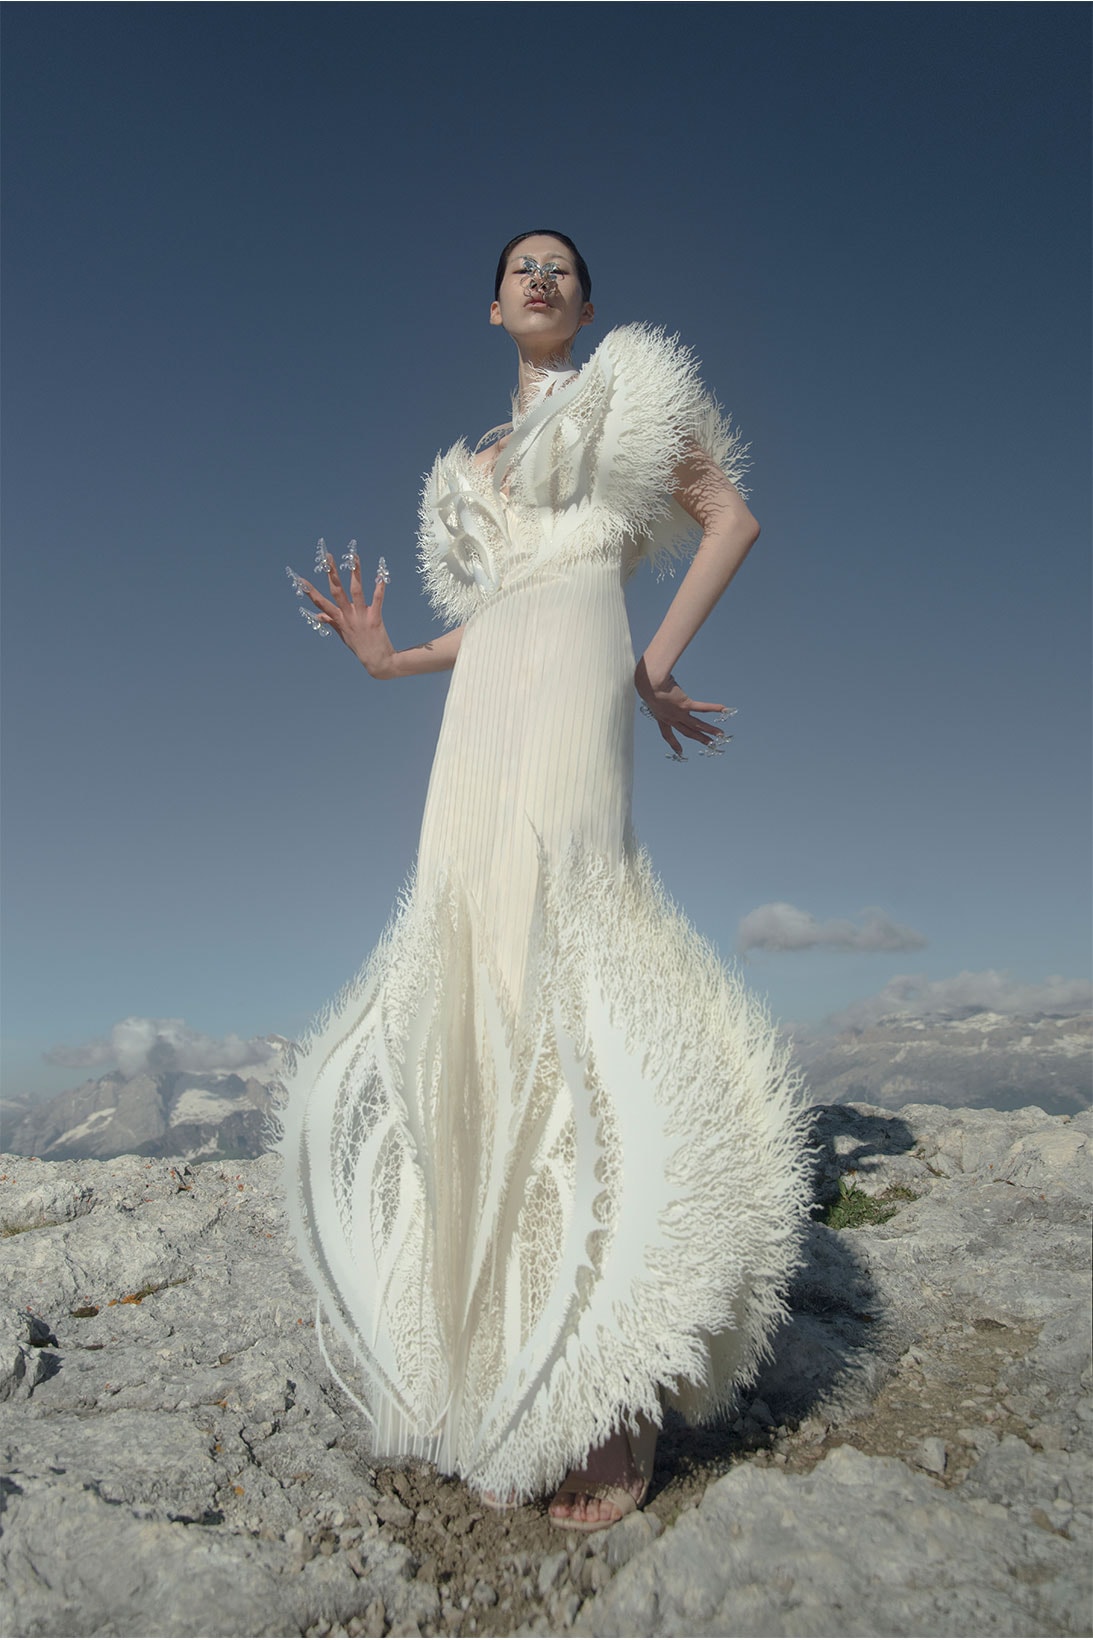 parley iris van herpen earthrise haute couture collaboration white gown dress design sustainable